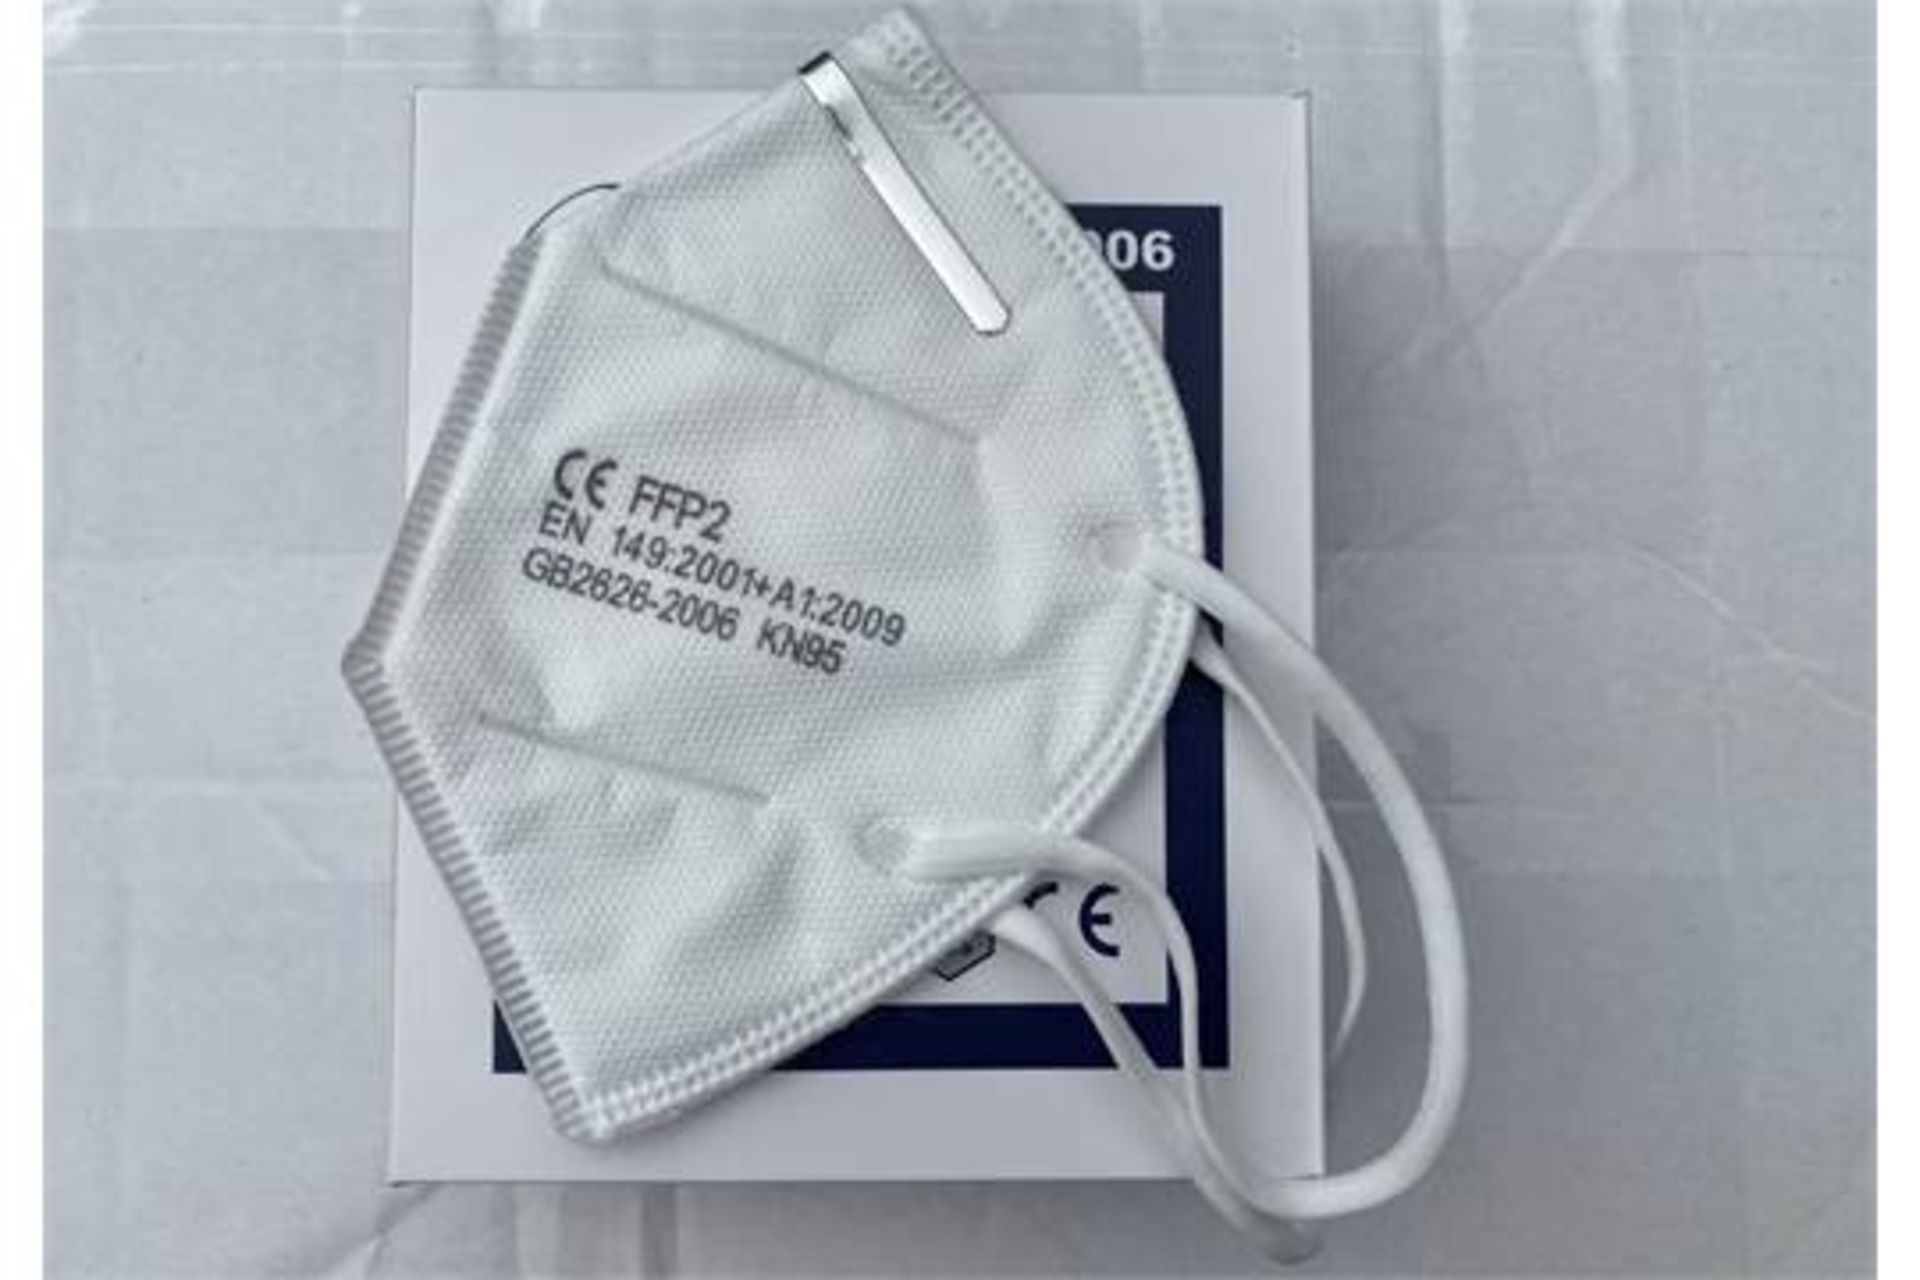 1,250X FFP2/KN95 FOLDING PROTECTIVE FACE MASK - Image 3 of 4